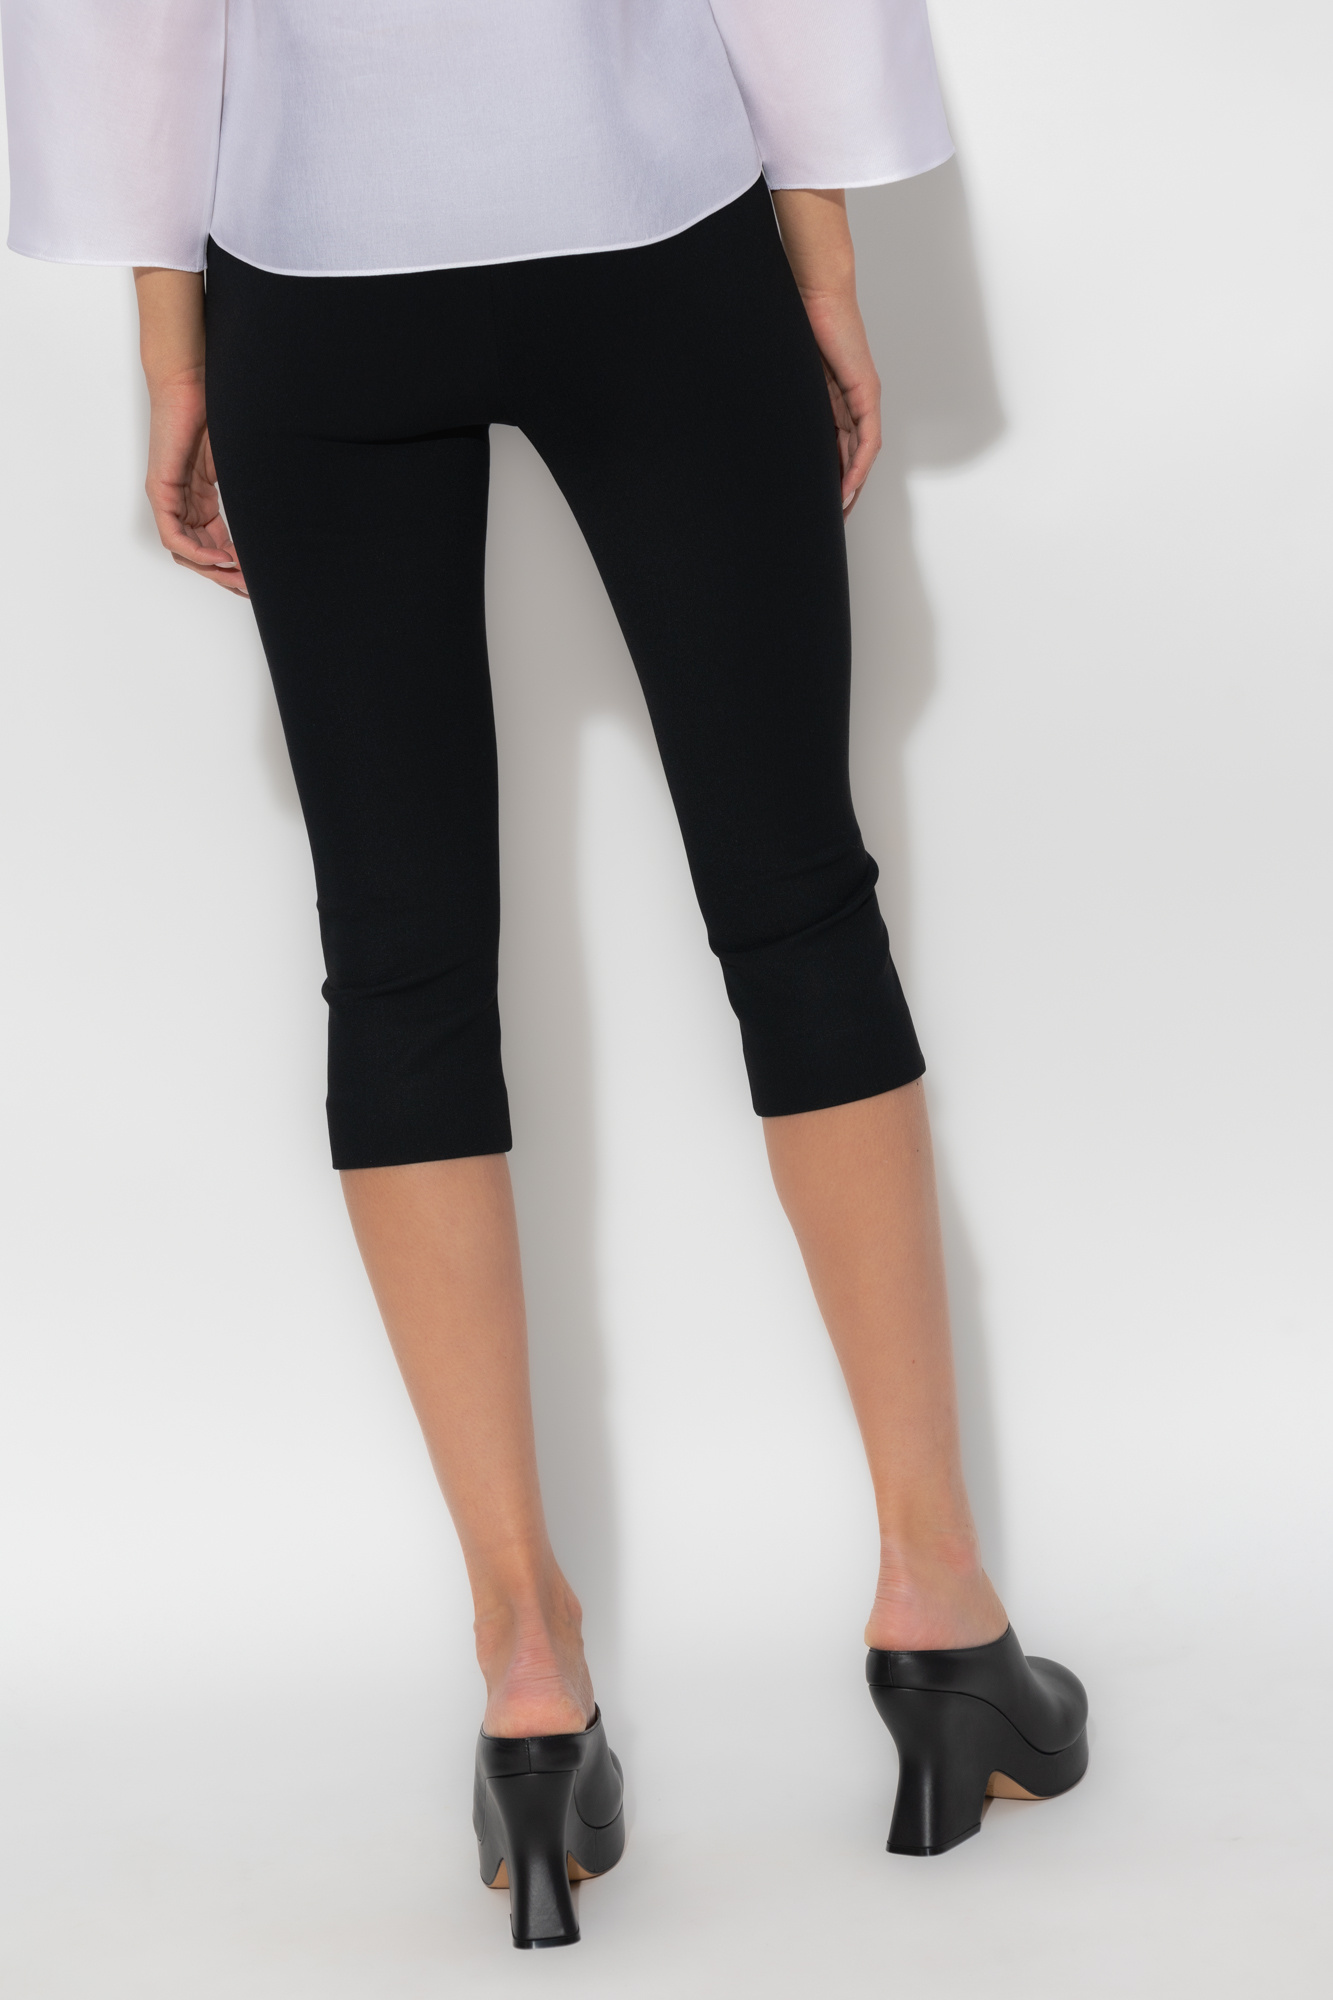 Tory Burch Mid-length trousers